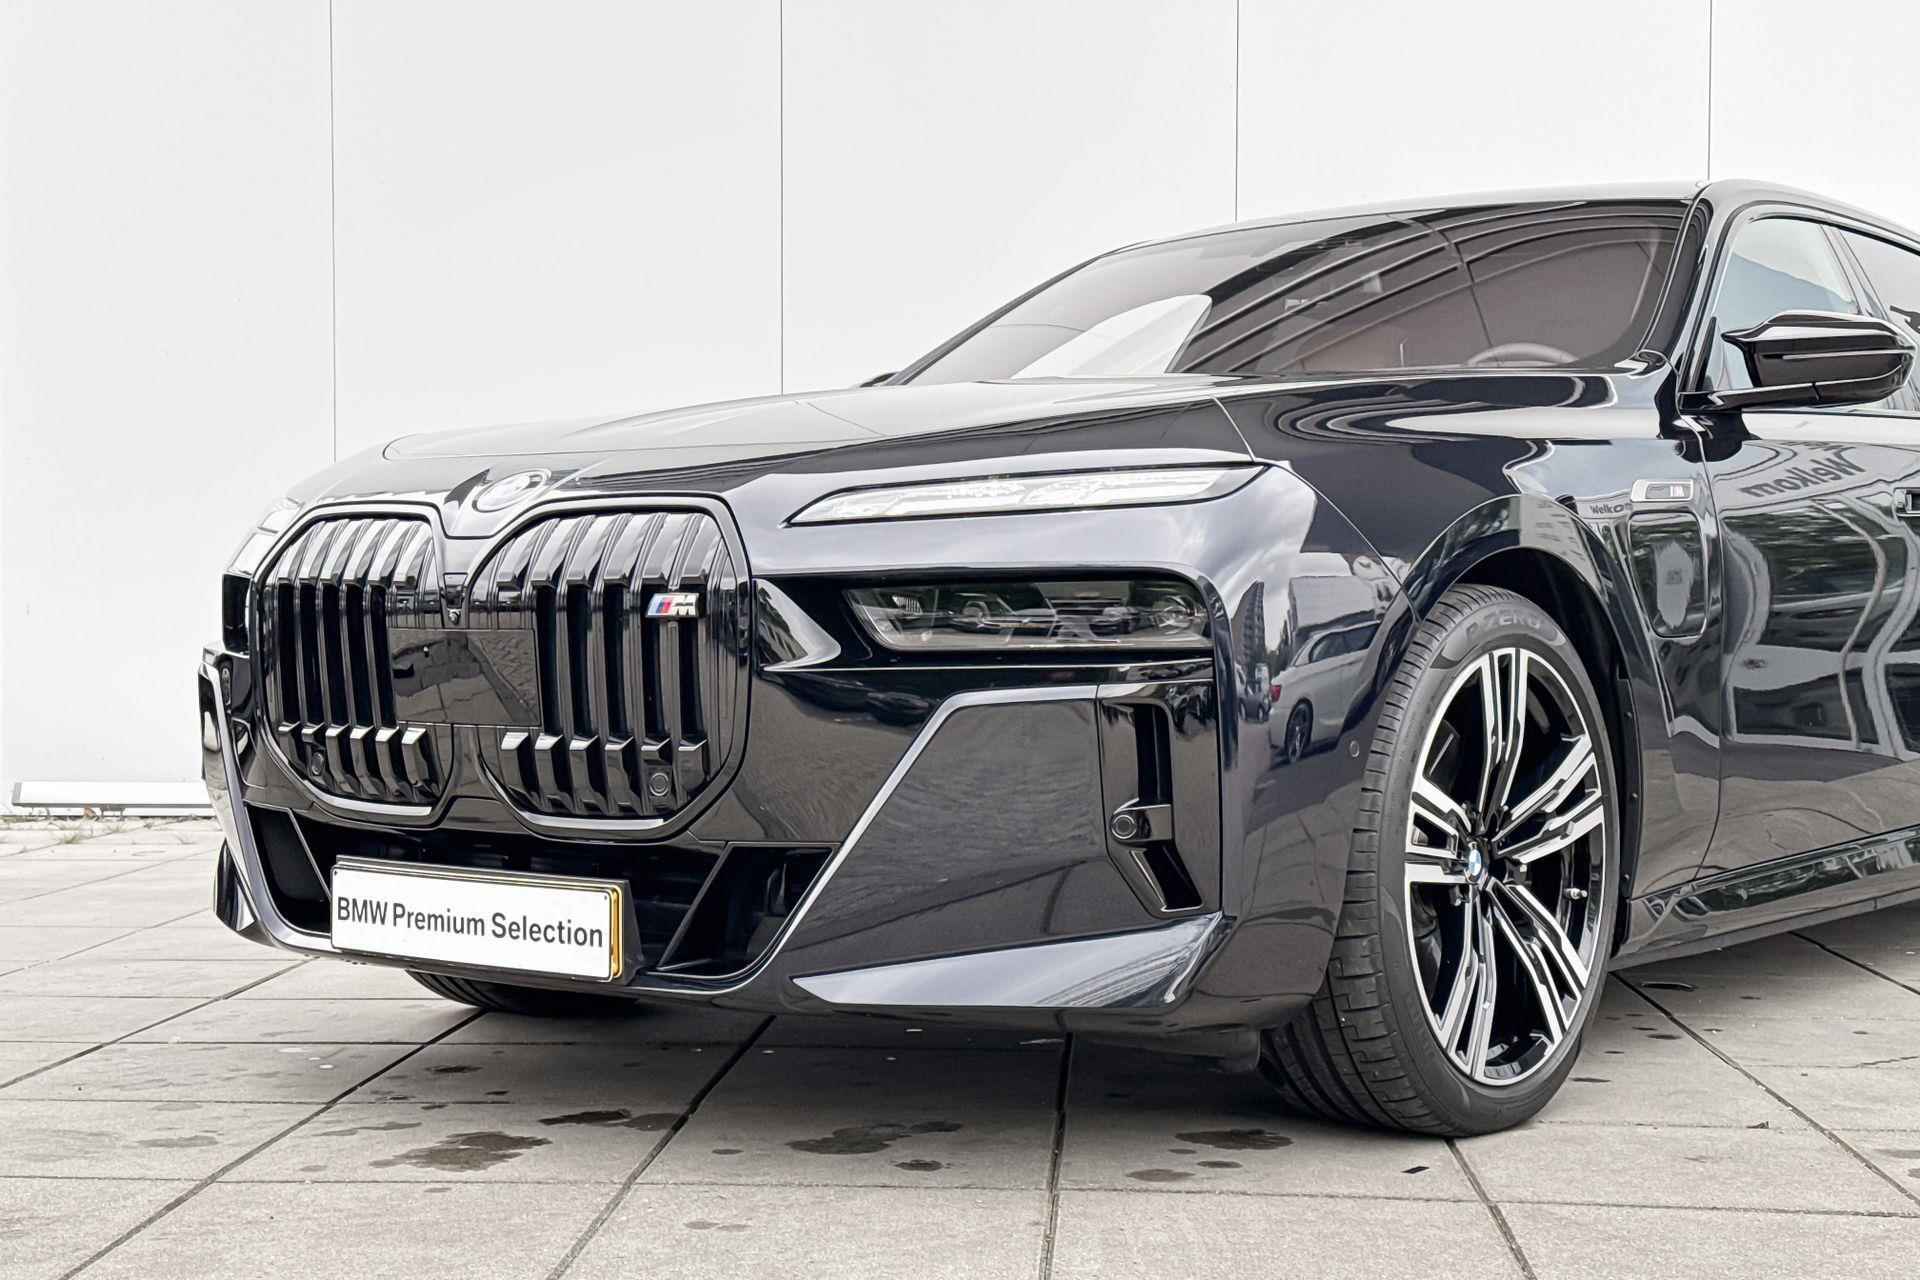 BMW 7 Serie M760e xDrive Bowers & Wilkins Diamond / Executive Lounge / Executive Pack / Performance Pack / Connoisseur Pack / Climate Acoustics Pack / Iconic Glow / Elektrische portieren / CraftedClarity - 23/27